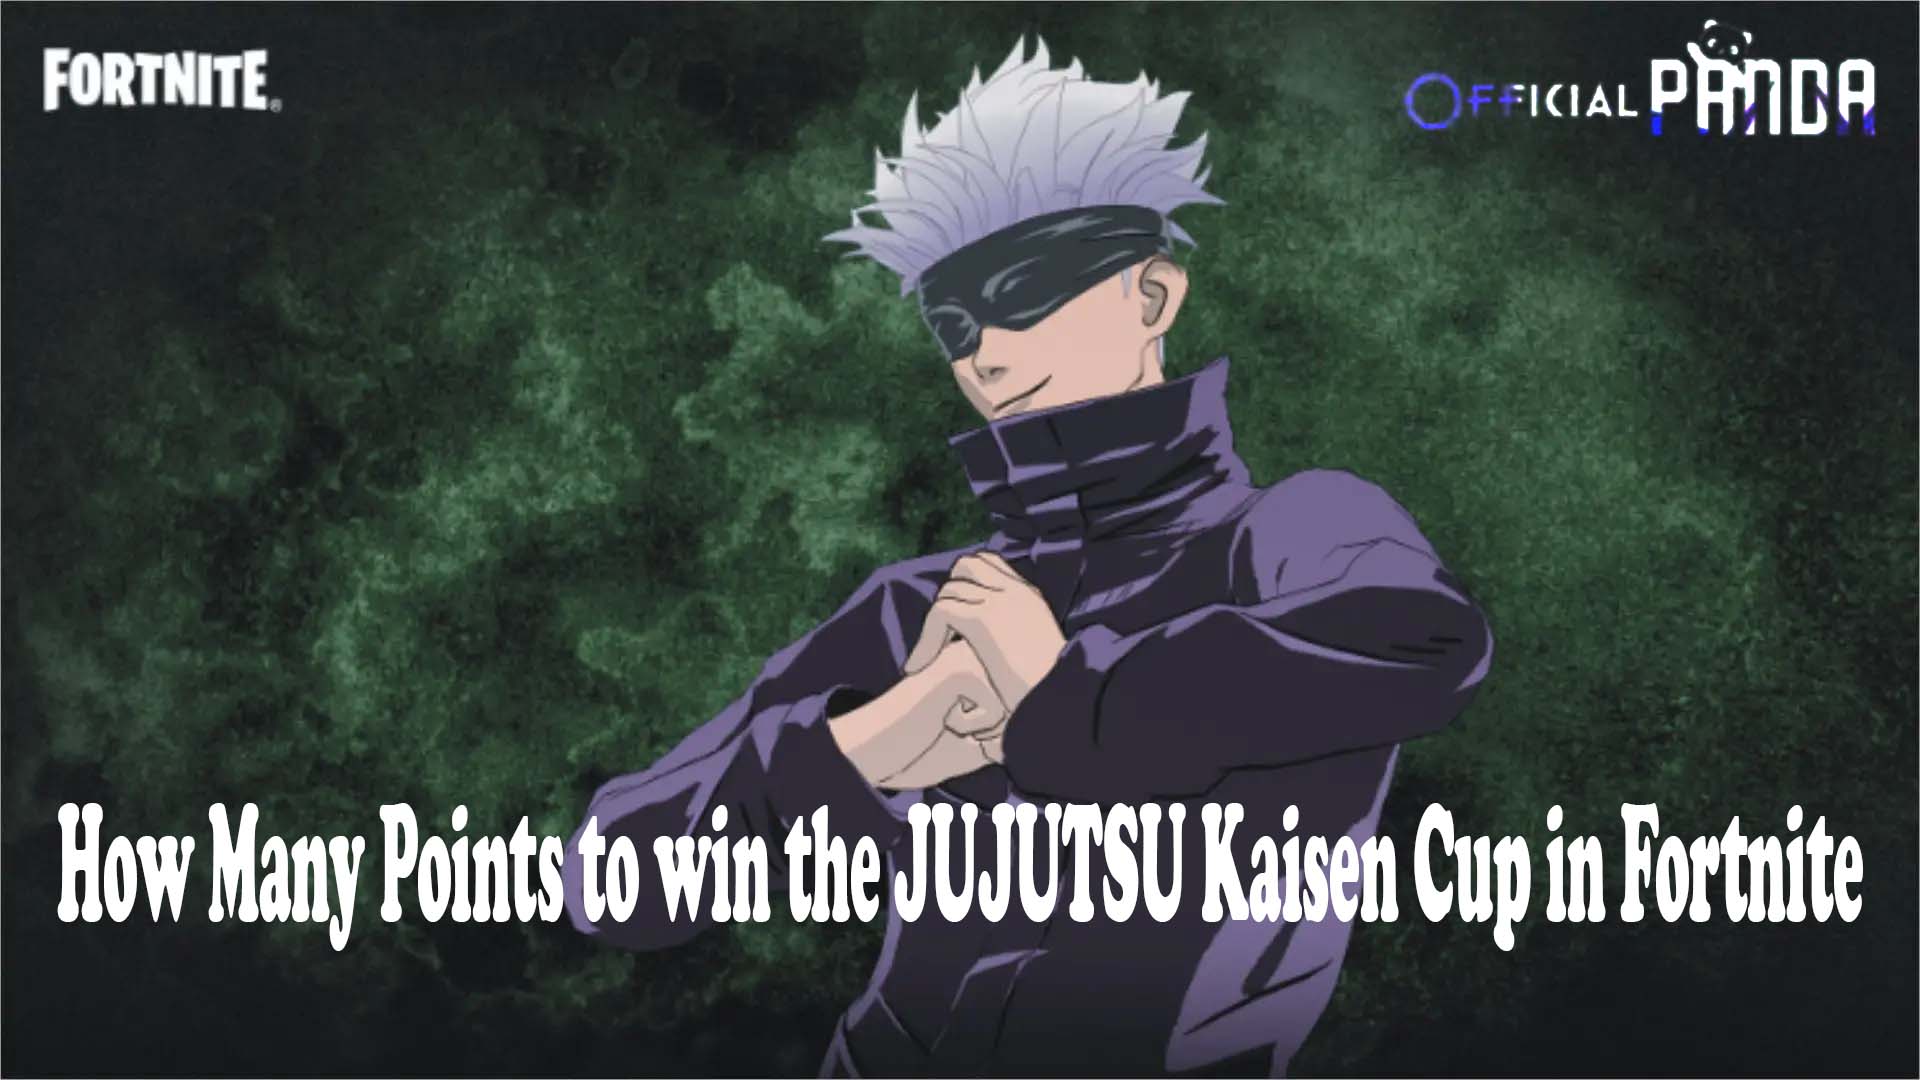 How Many Points to win the JUJUTSU Kaisen Cup in Fortnite